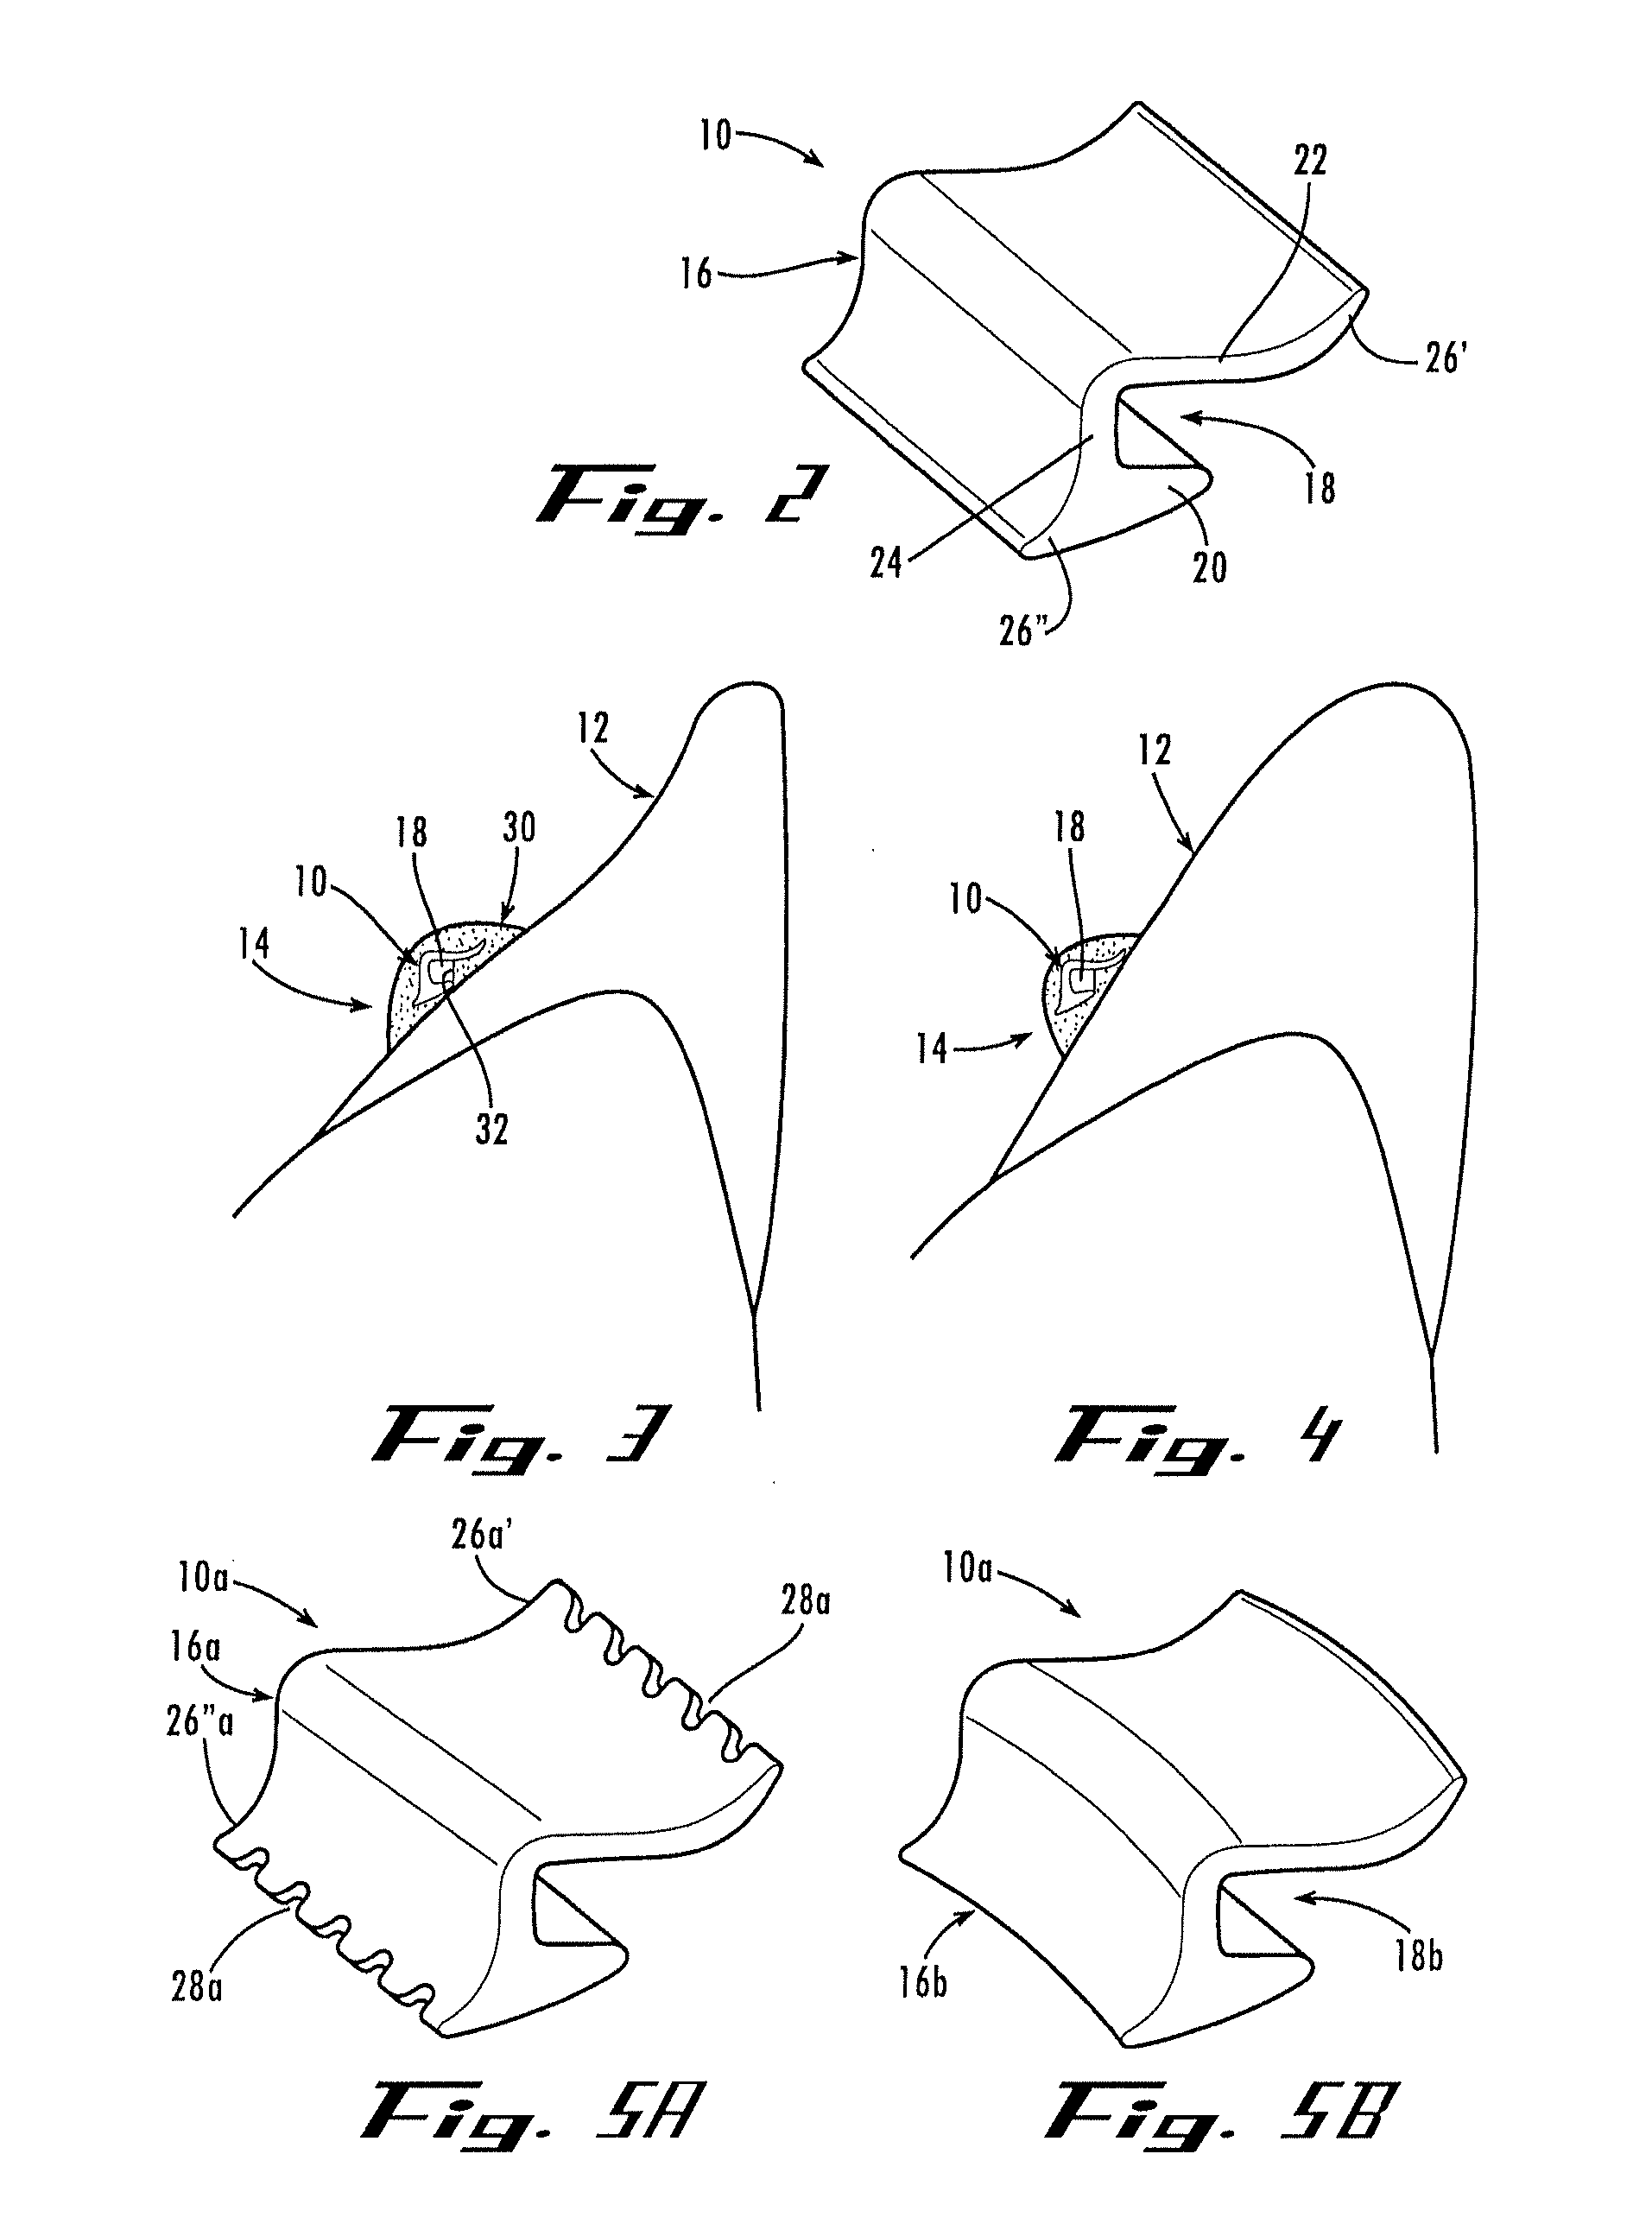 Orthodontic bracket and method of attaching orthodontic brackets to teeth